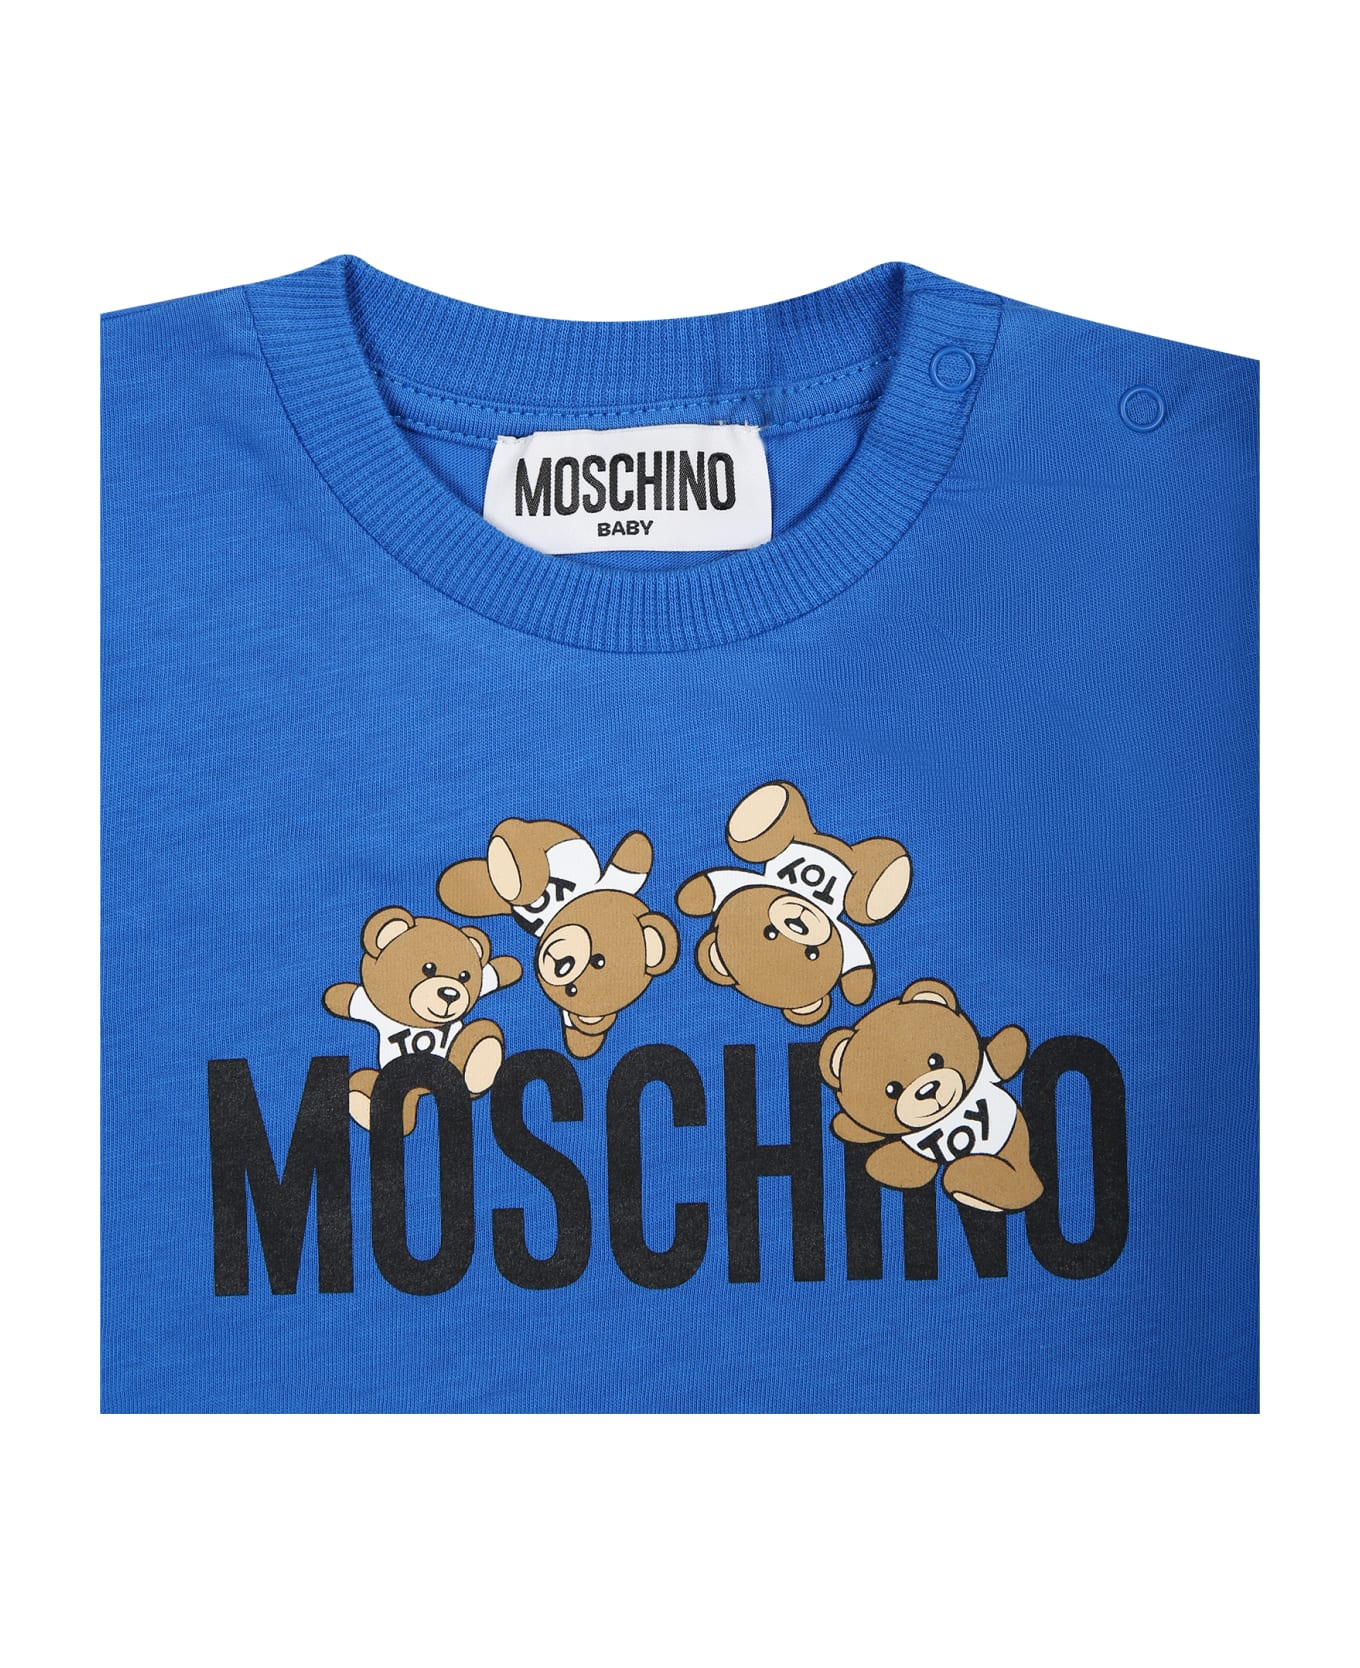 Moschino Blue T-shirt For Baby Boy With Teddy Bears And Logo - Blue